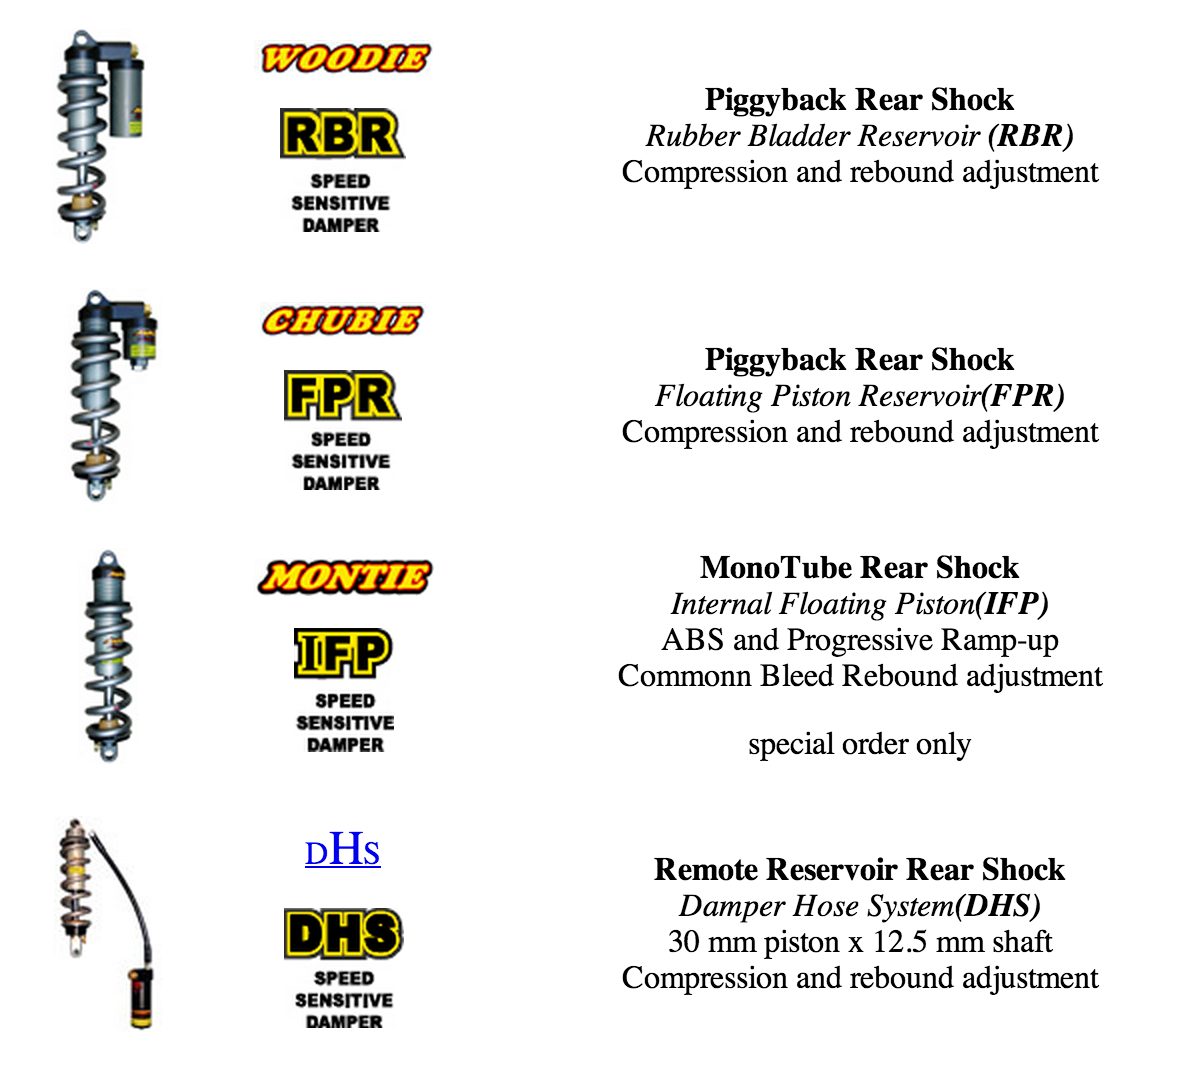 The Avalanche Rear Shock Lineup, Blister Gear Review